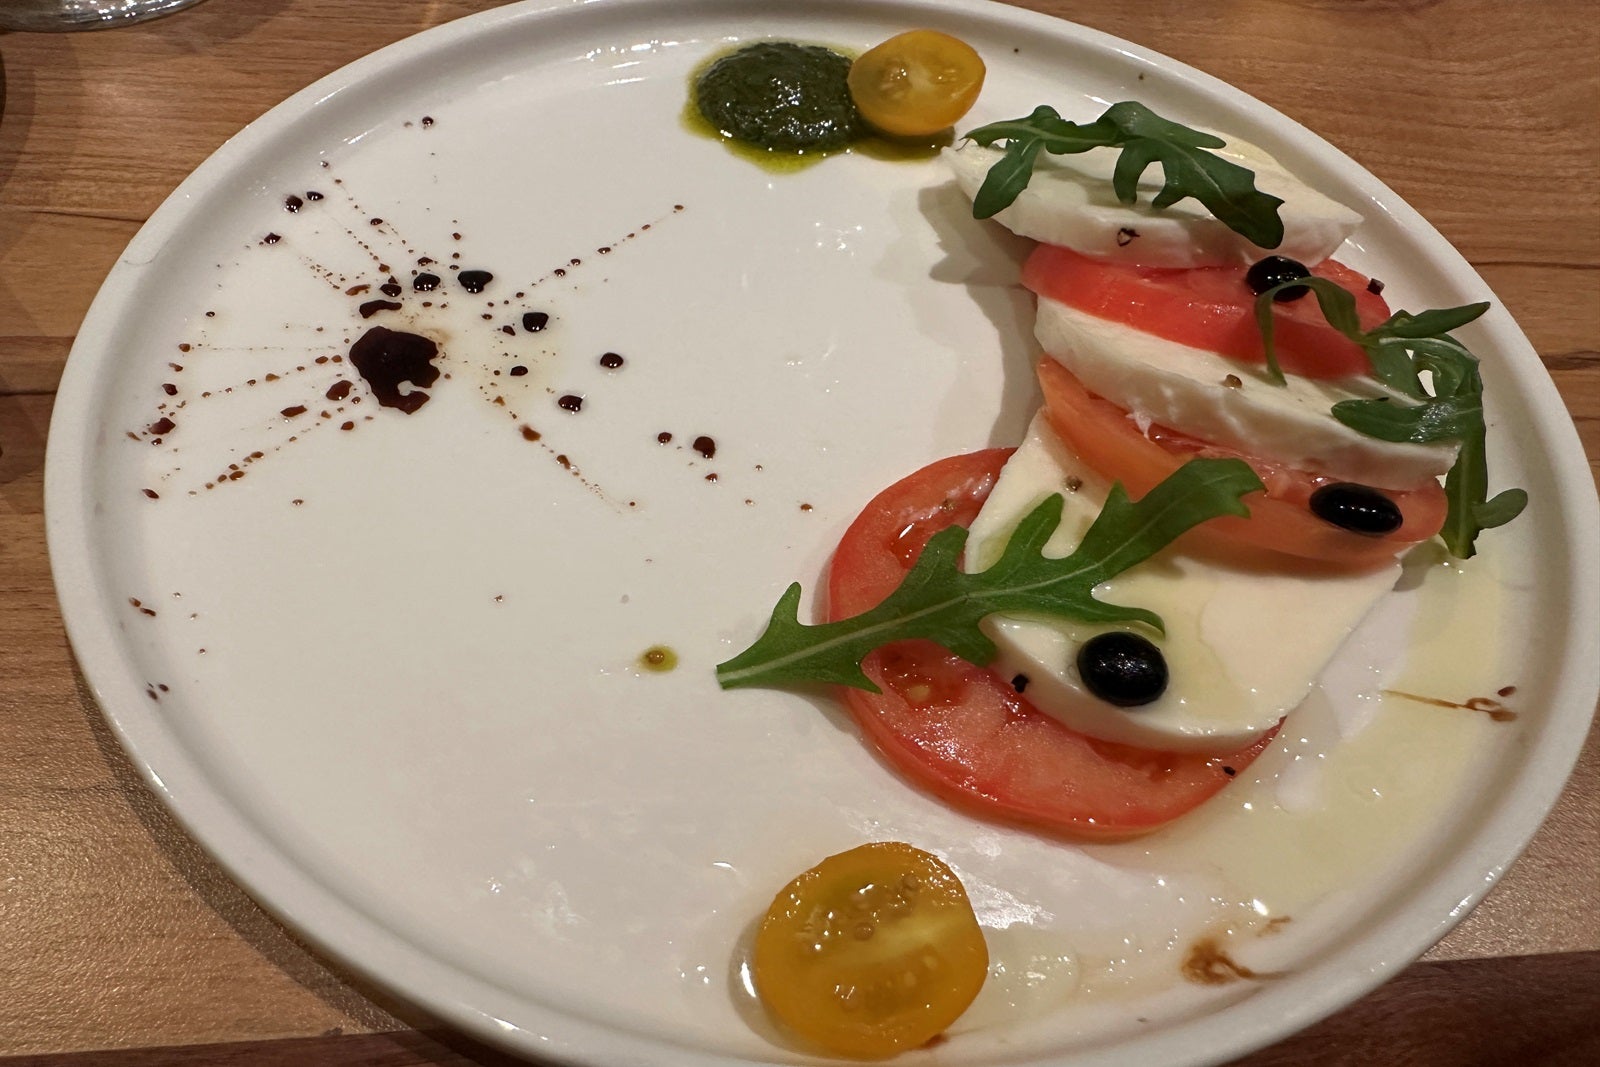 You are currently viewing Cucina del Capitano menu: What to expect when you eat at Carnival Cruise Line’s Italian restaurant